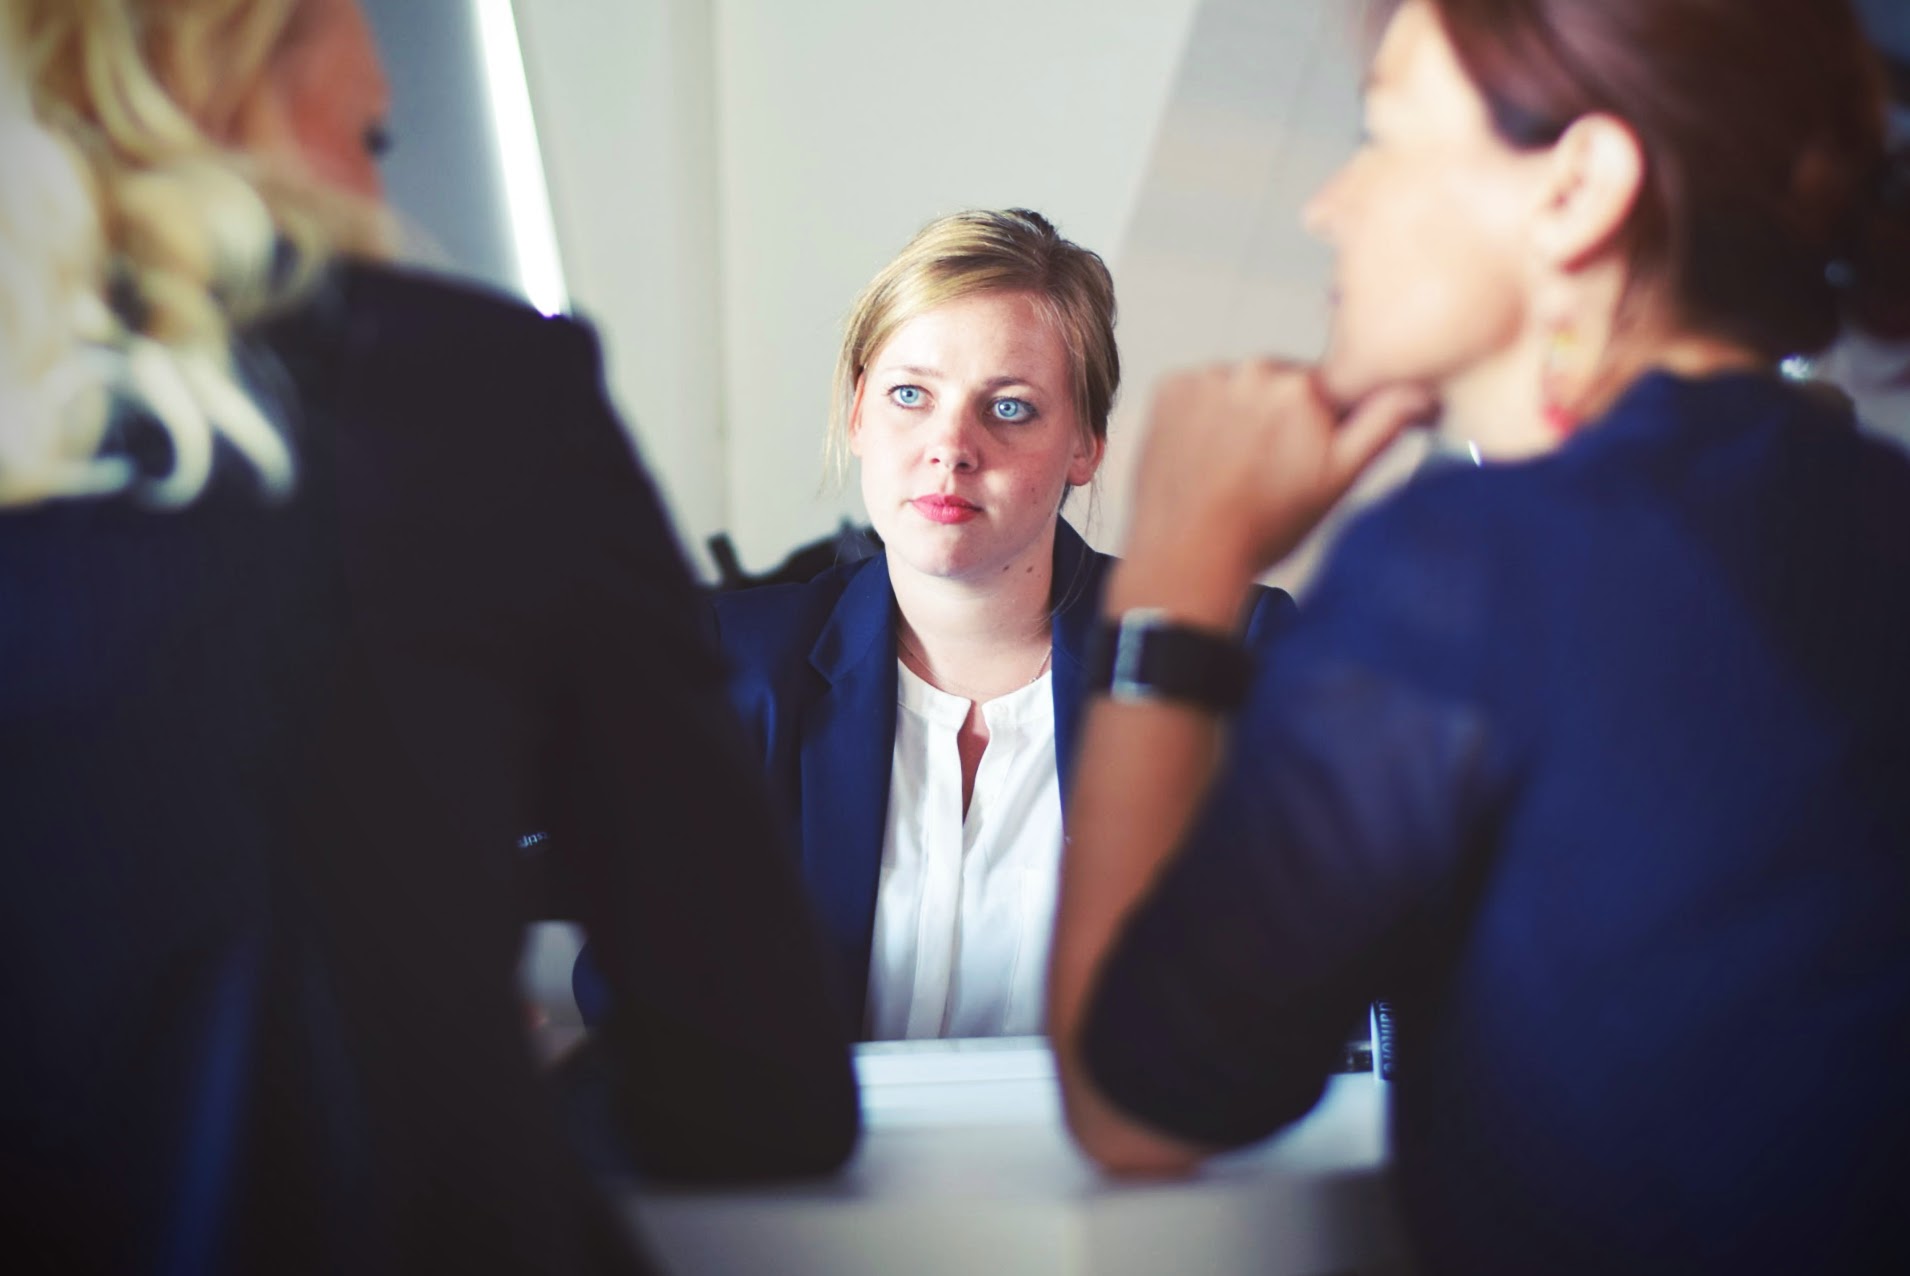 Professional Women: Are You Unwittingly Sabotaging Your Own Success? [845 words]